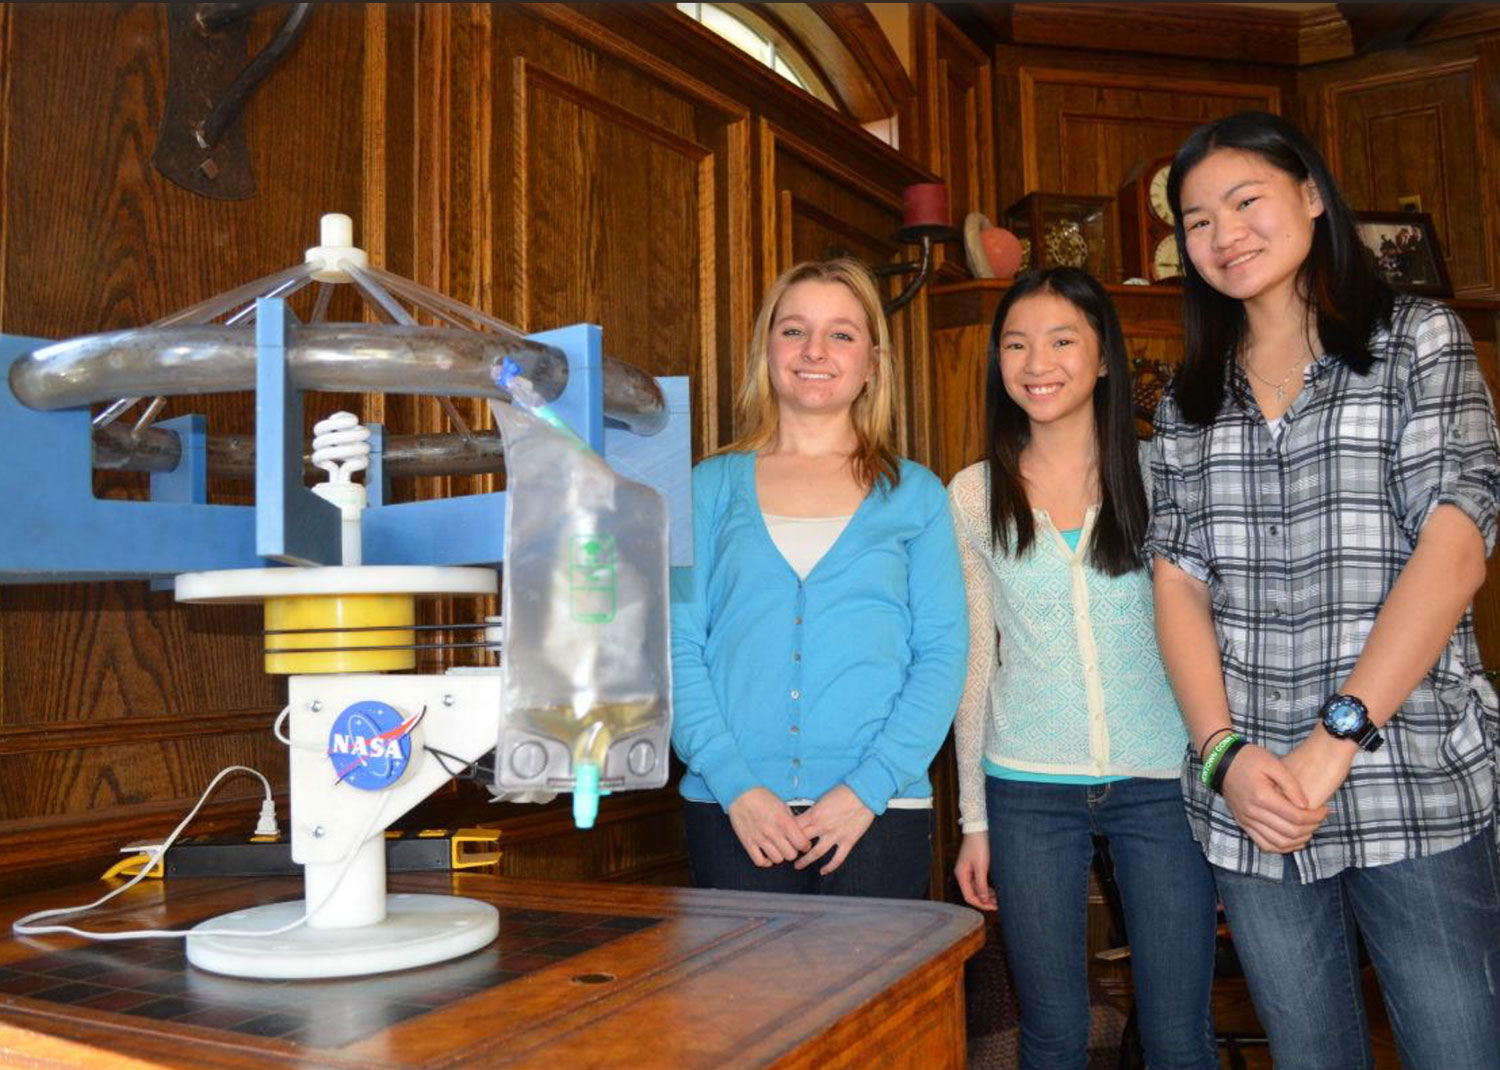 Sisters MaryAnn Bulawa, Adia Bulawa and Lillith Bulawa have developed a hydroponic garden designed to work in the microgravity of low Earth orbit. They are presently running a crowdfunding campaign to pay for the costs of sending the experiment to the International Space Station.